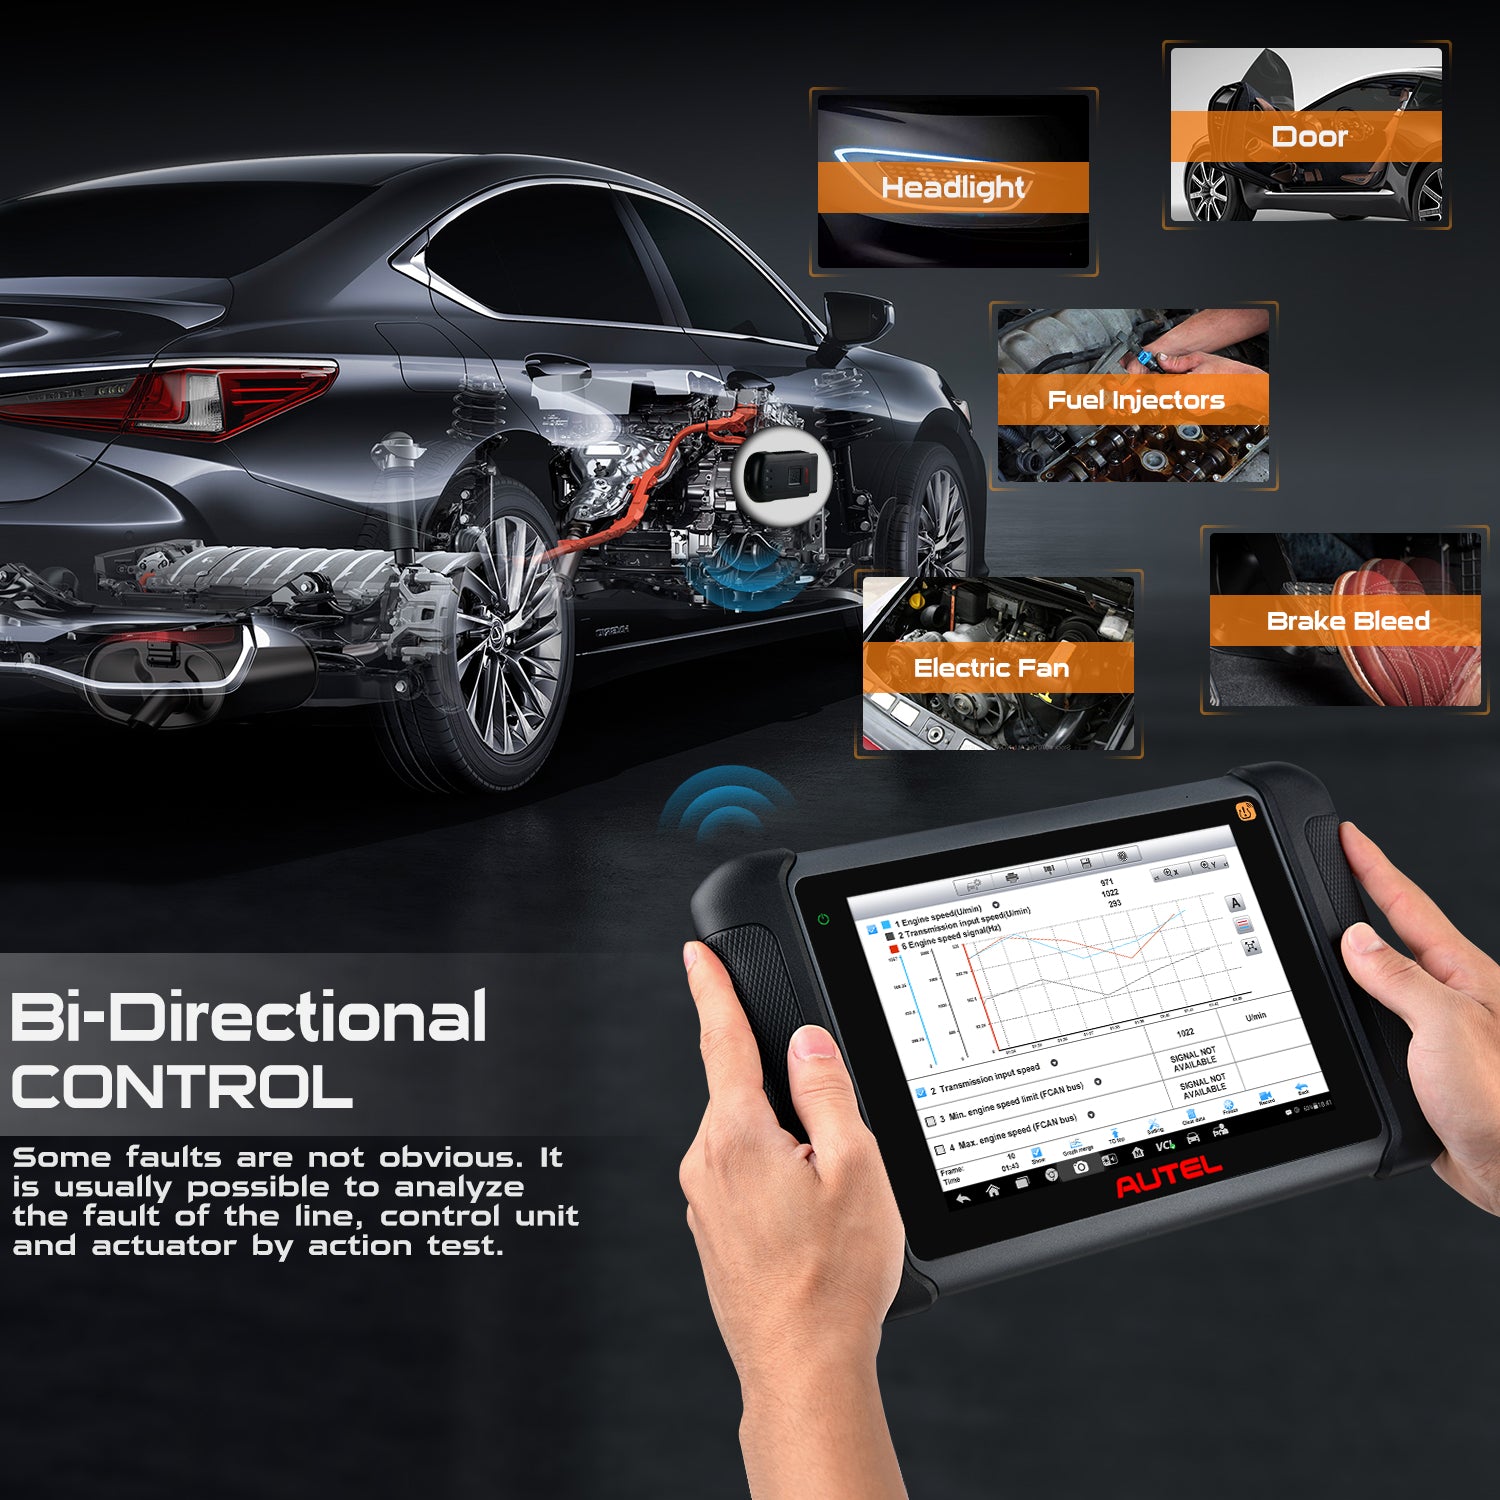 Autel Maxisys MS906TS Bi-Directional Control (active test)